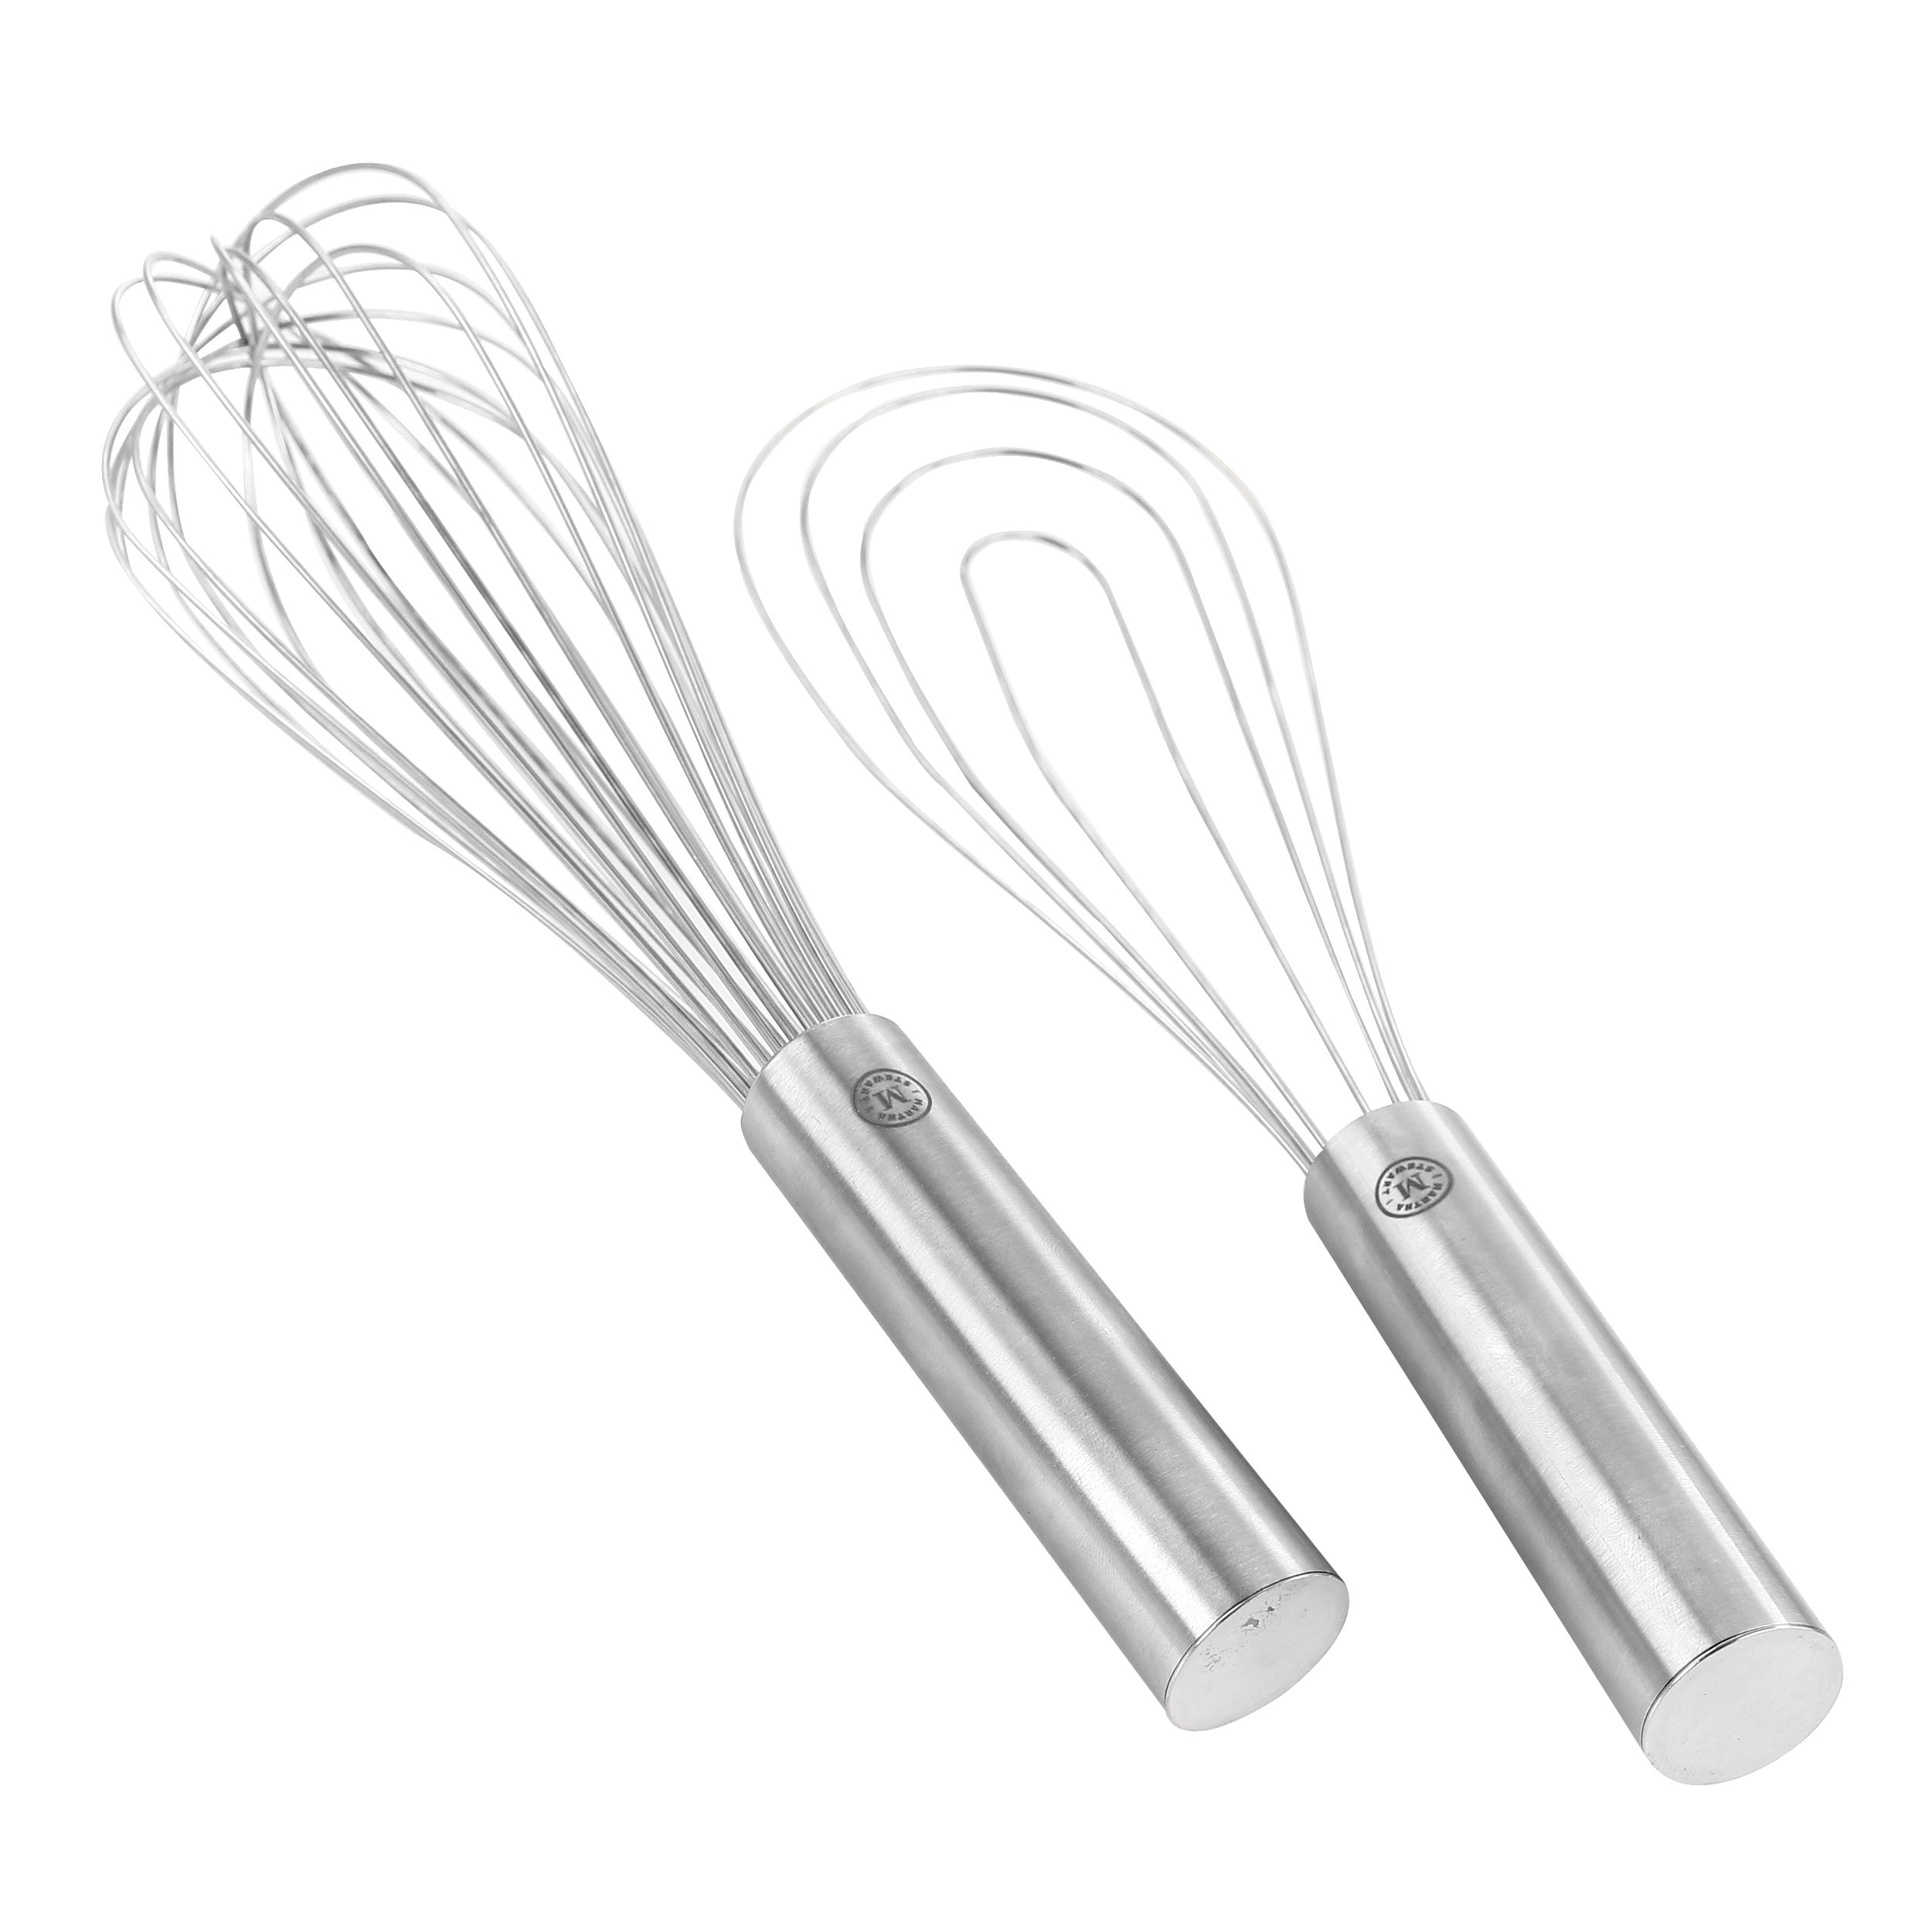 https://ak1.ostkcdn.com/images/products/is/images/direct/5bbfaa760ba4c0a8398eff4efd0a7d9119cec120/Martha-Stewart-Stainless-Steel-2-Piece-Whisk-Set.jpg